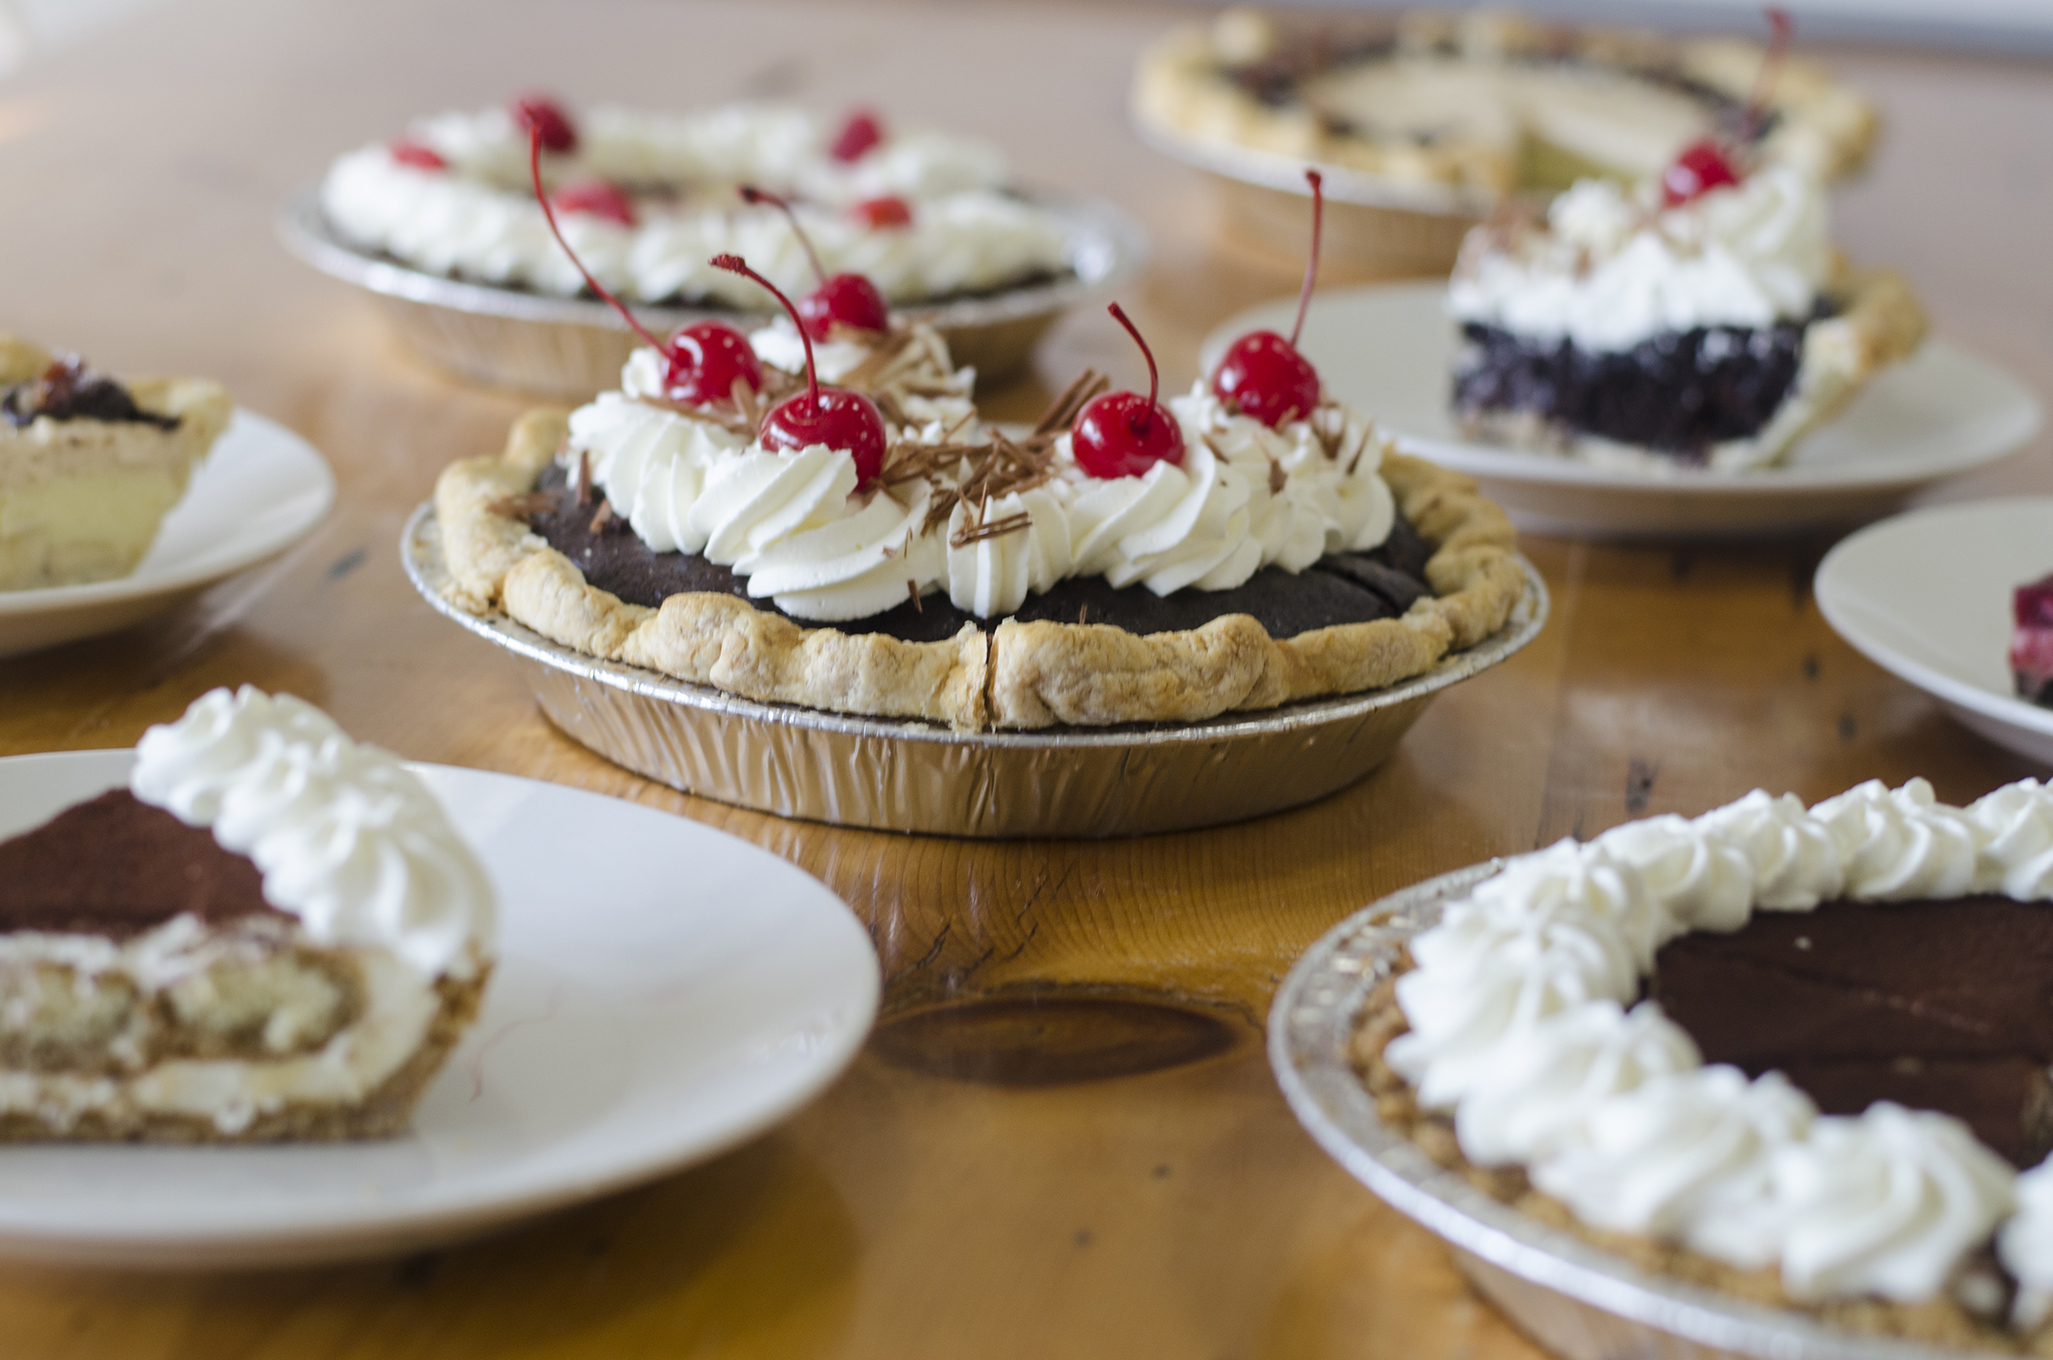 Pies as far as the eyes can see at Riverside Pie Cafe in Windsor, Ontario.